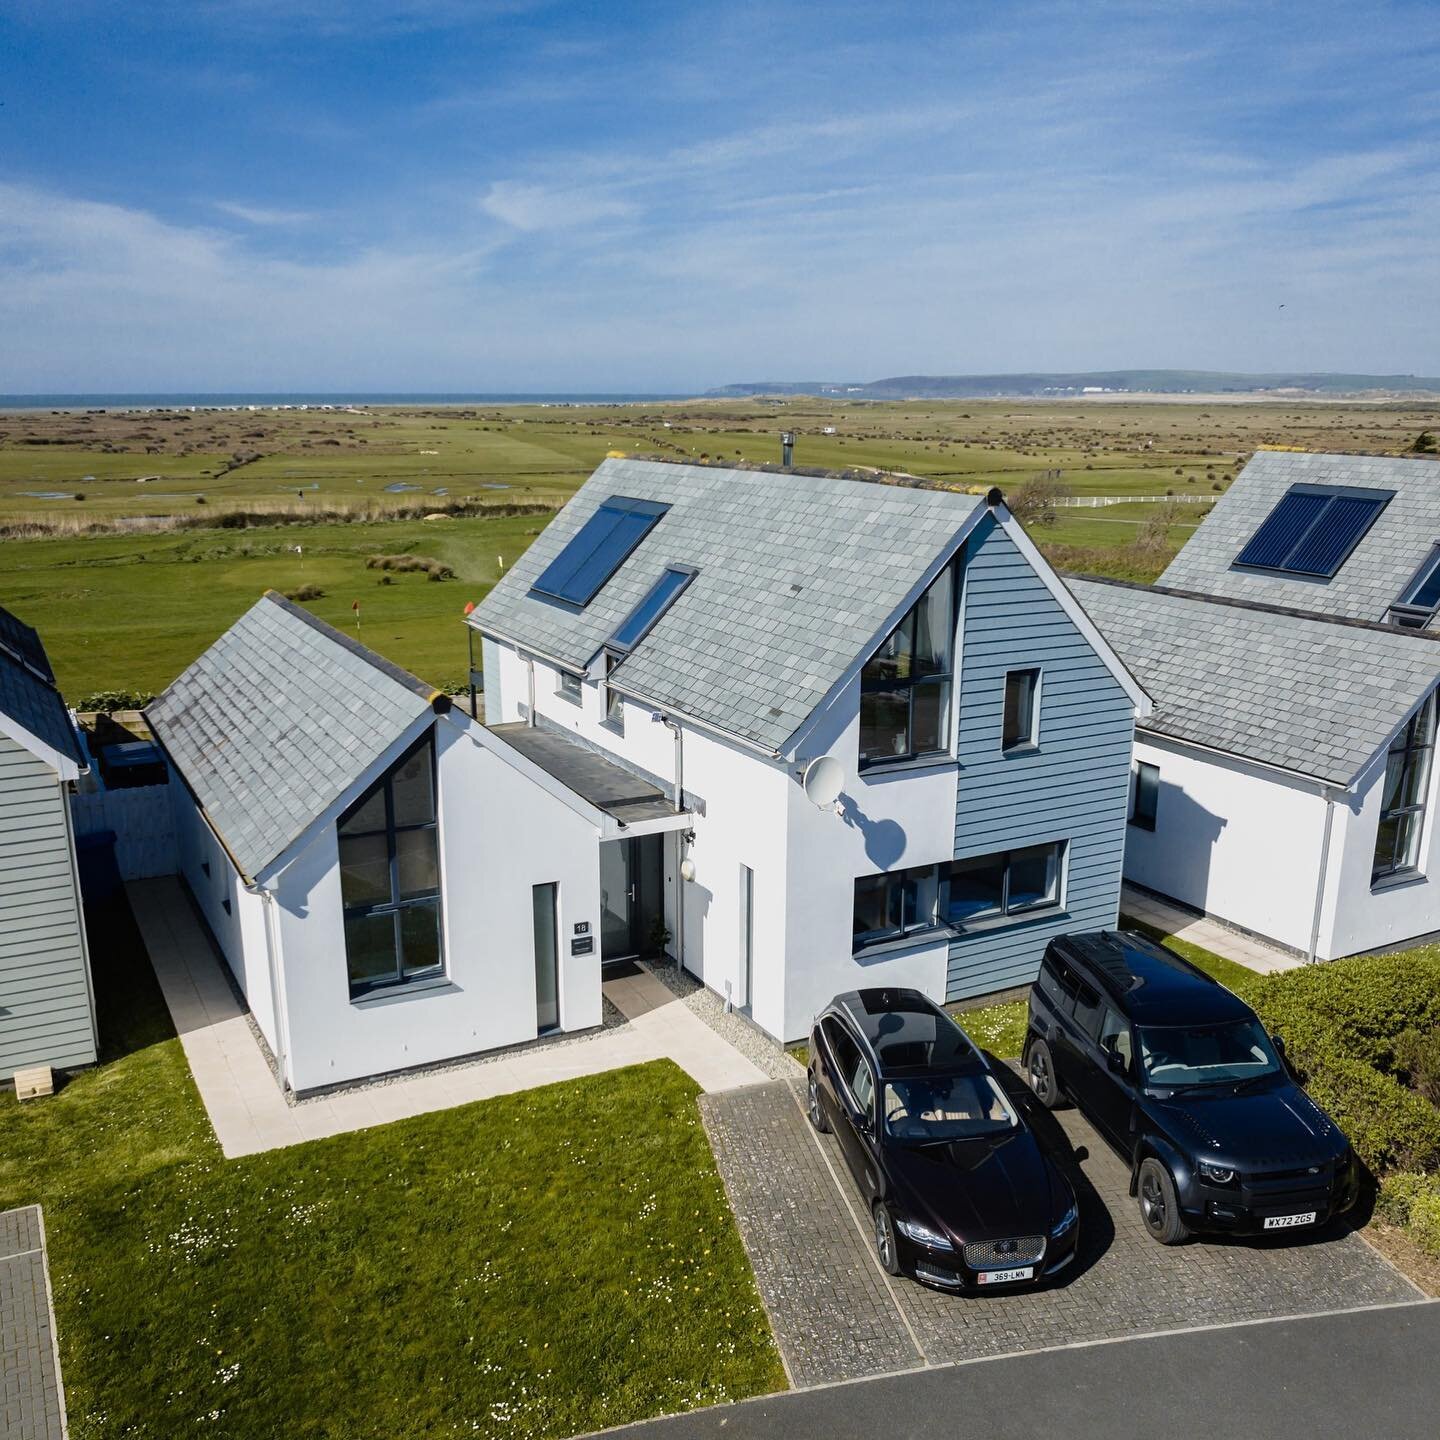 Welcome to Nolands Ho!

Are you looking for a stunning coastal staycation this summer? Then look no further than Nolands Ho!

Our beautiful holiday home is situated on the edge of Westward Ho!, North Devon, overlooking Northam Burrows Country Park, L